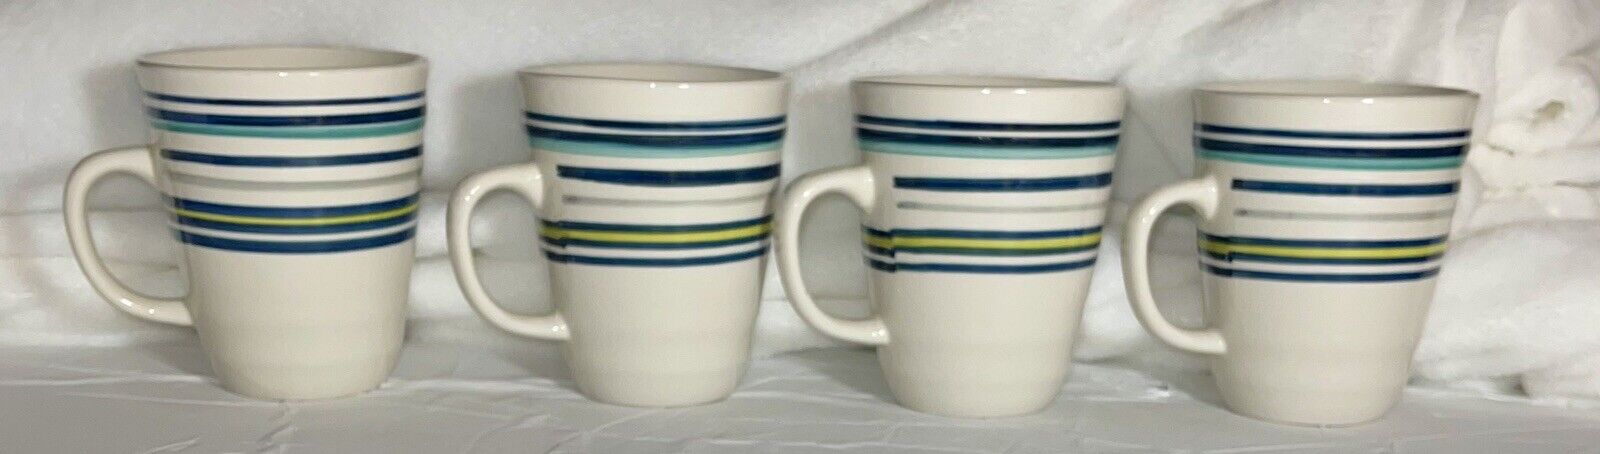 Set of 4 Gibson Everyday Coffee Tea Mugs Cups Striped Blue & Green on White